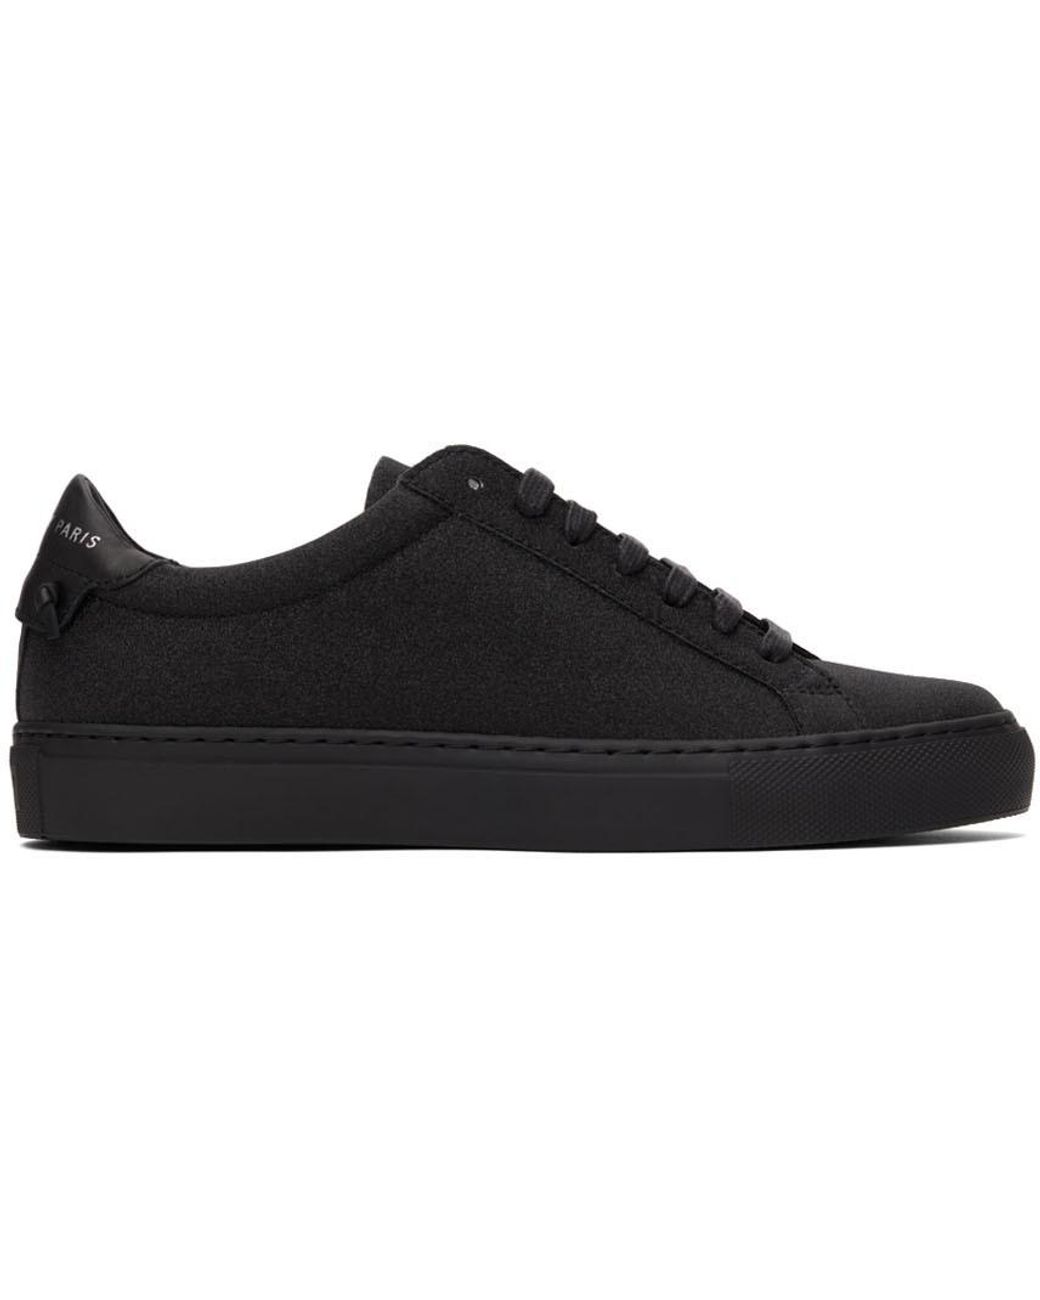 Givenchy Leather Black Glitter 4g Urban Knots Sneakers | Lyst